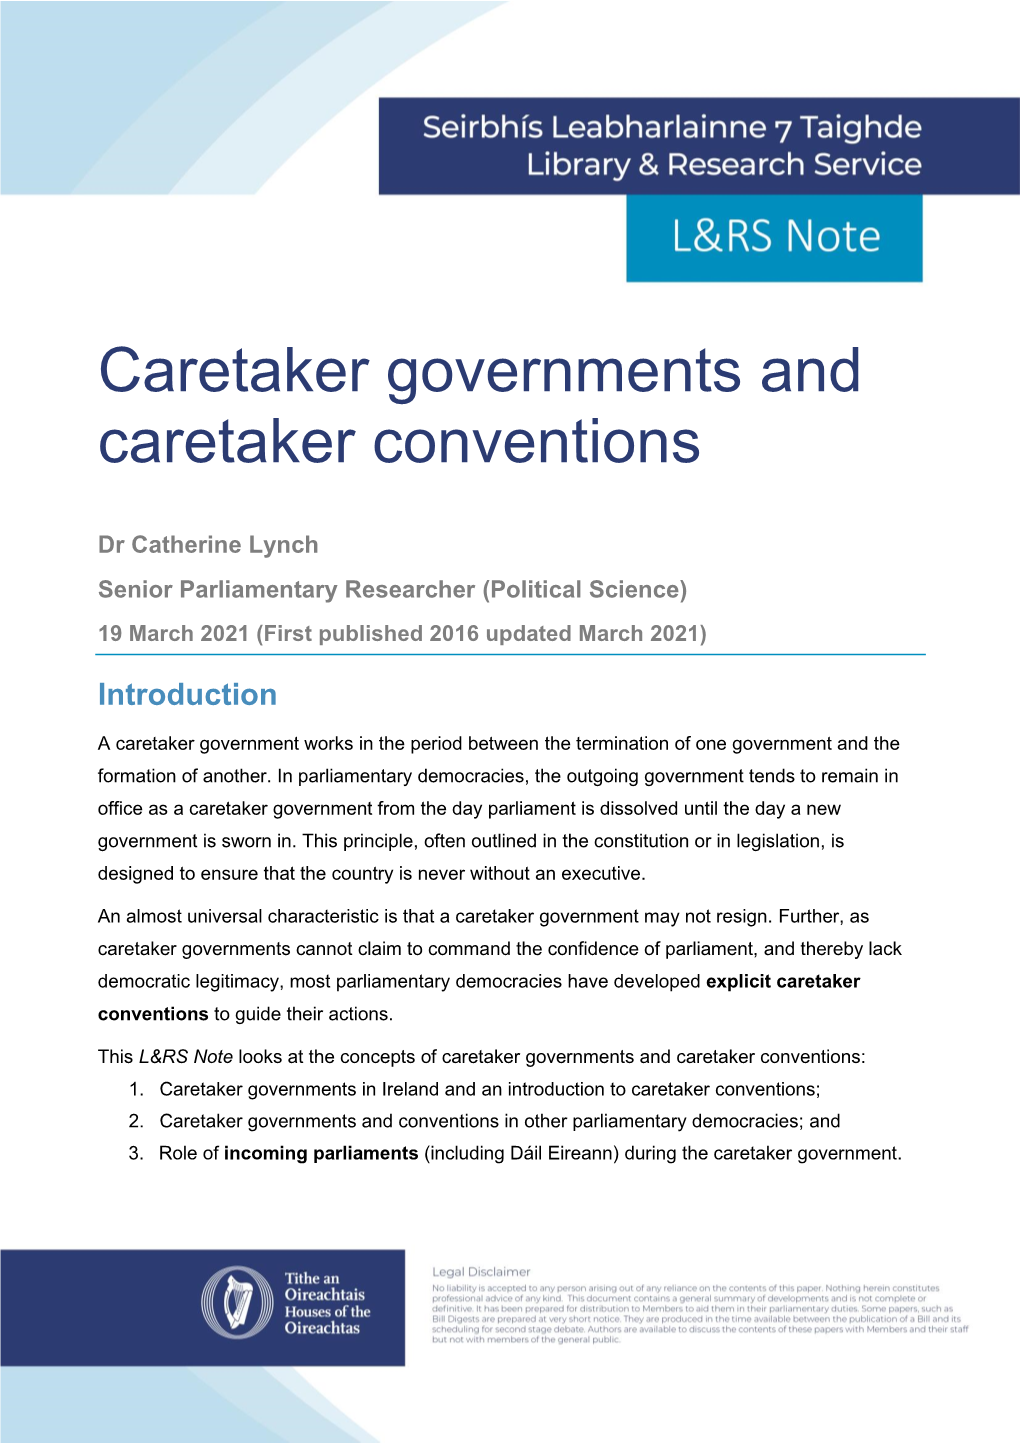 L&RS Note: Caretaker Governments and Caretaker Conventions